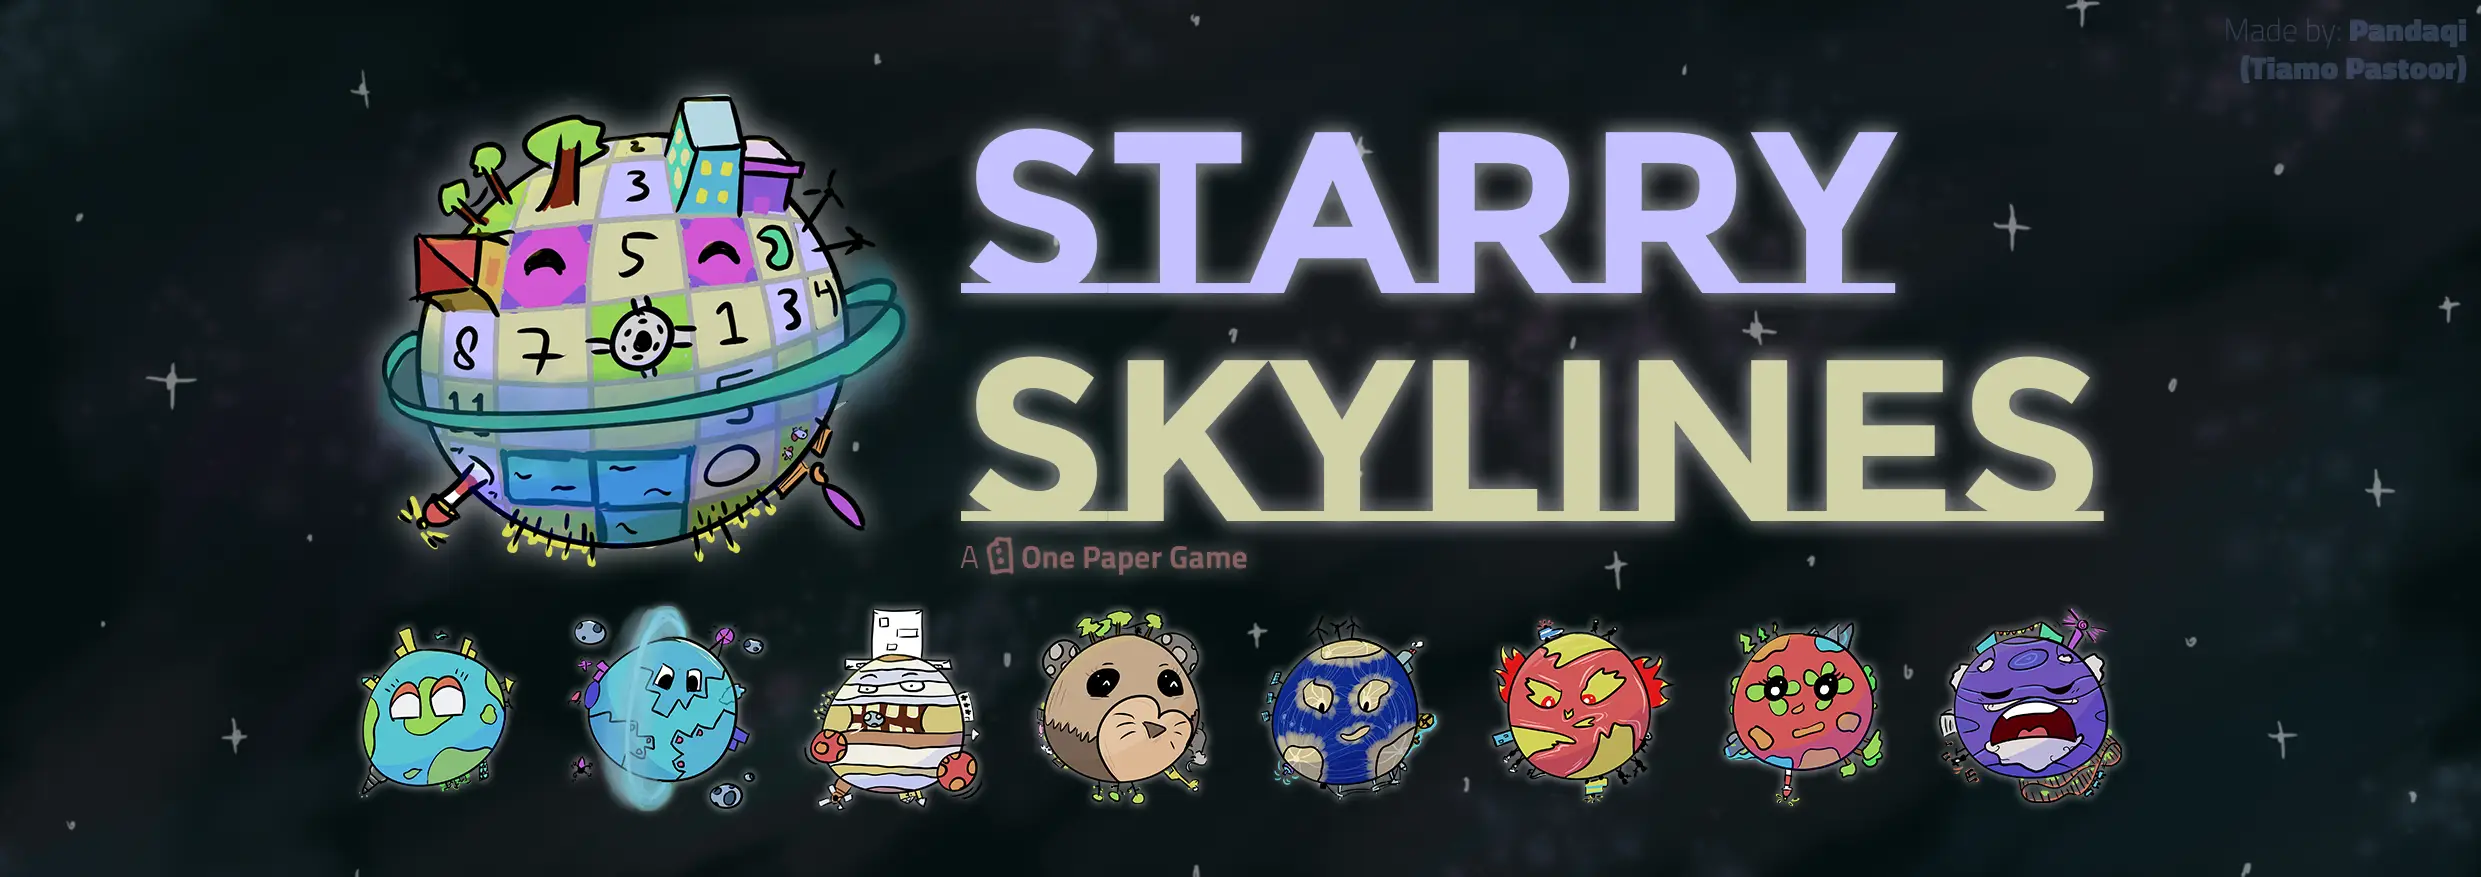 Thumbnail / Header for article: Starry Skylines (Part 2)